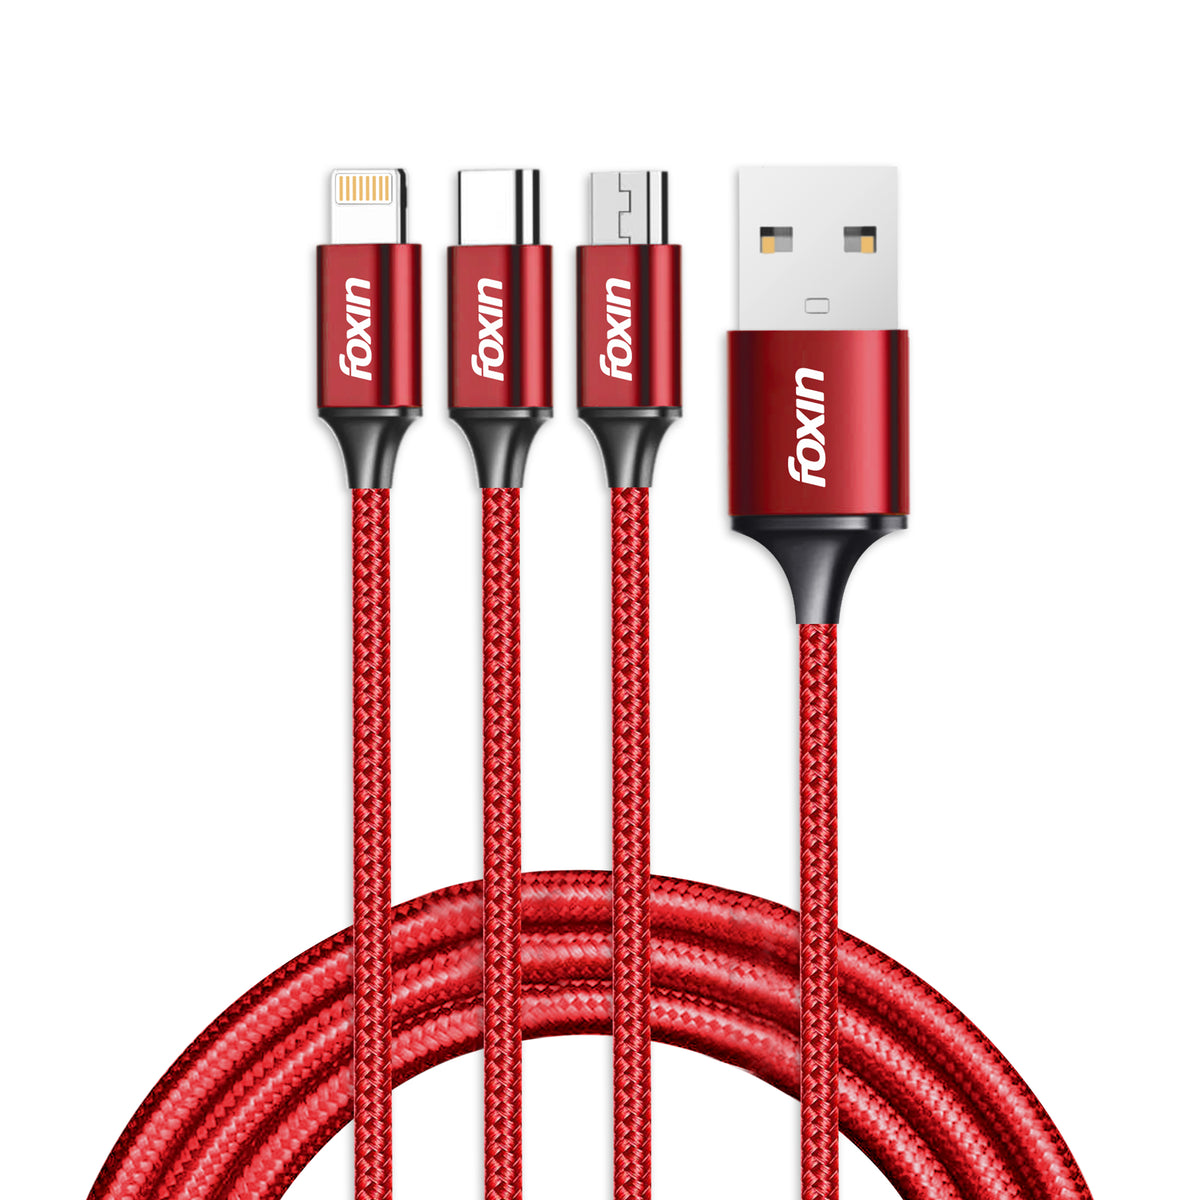 Foxin FDC-MAC03 3-in-1 USB Cable 1.2m | Up to 3.0A Current | Alloy Metal Shell | Kevlar Braided | BIS Certified | 6-Month Warranty | Red Colour